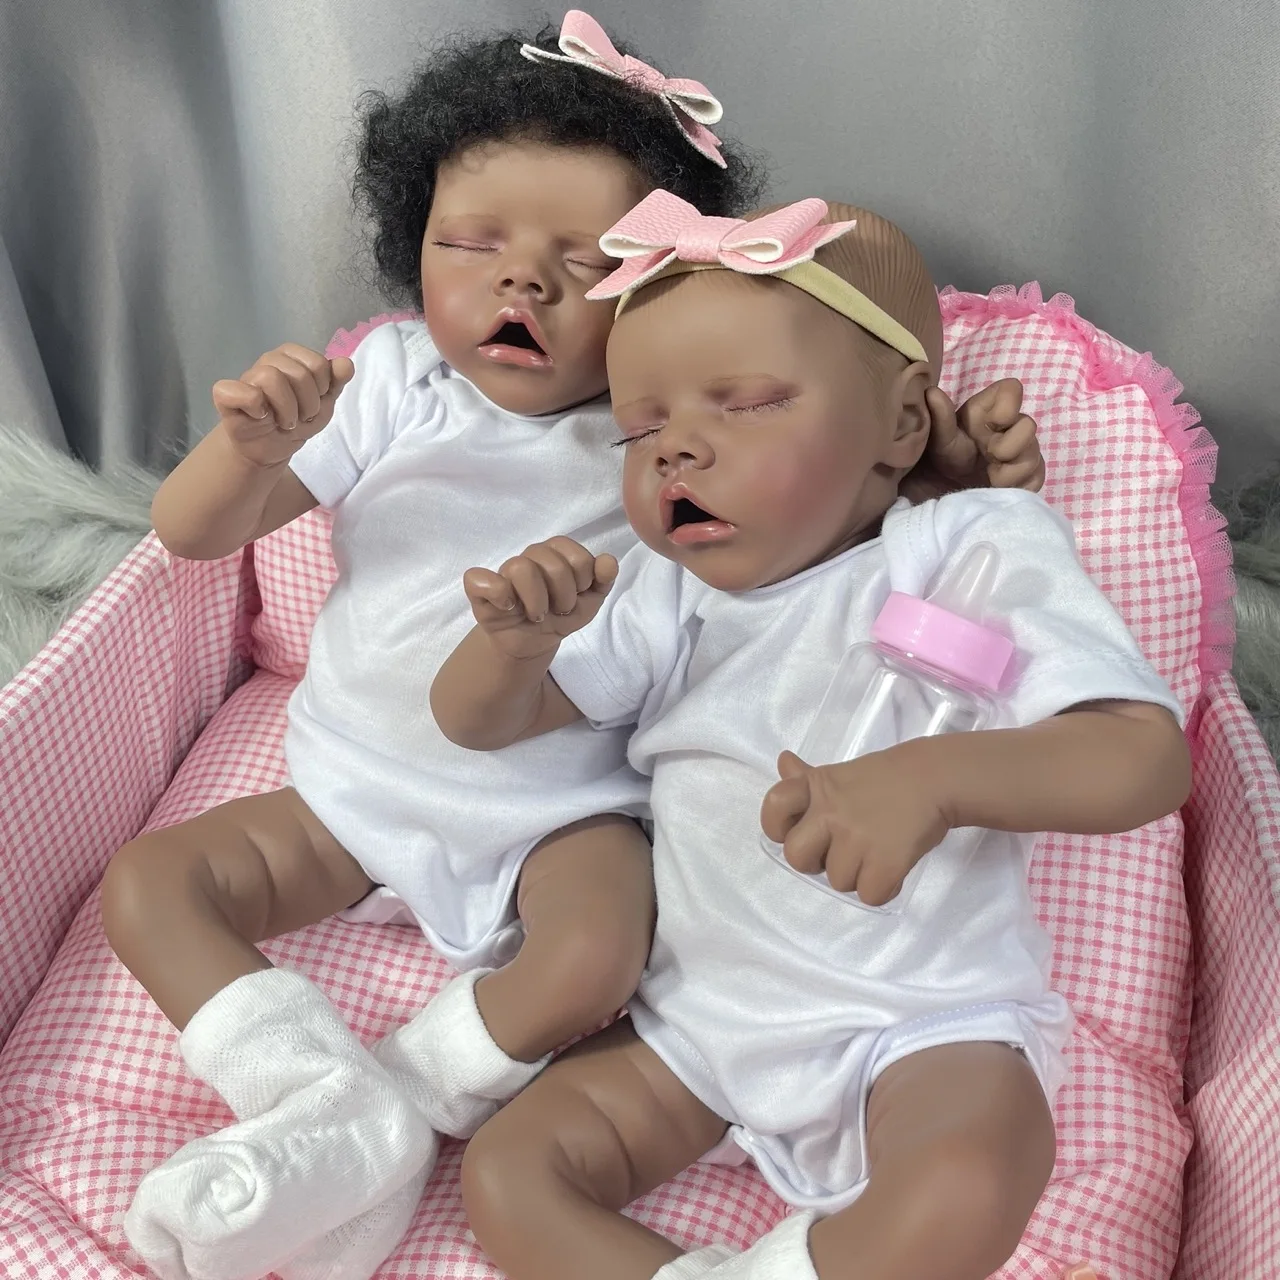 43CM Finished Reborn Baby Doll Twins African American Dark Skin Girl Premature Baby Collectible Art Doll - Reborn Doll World